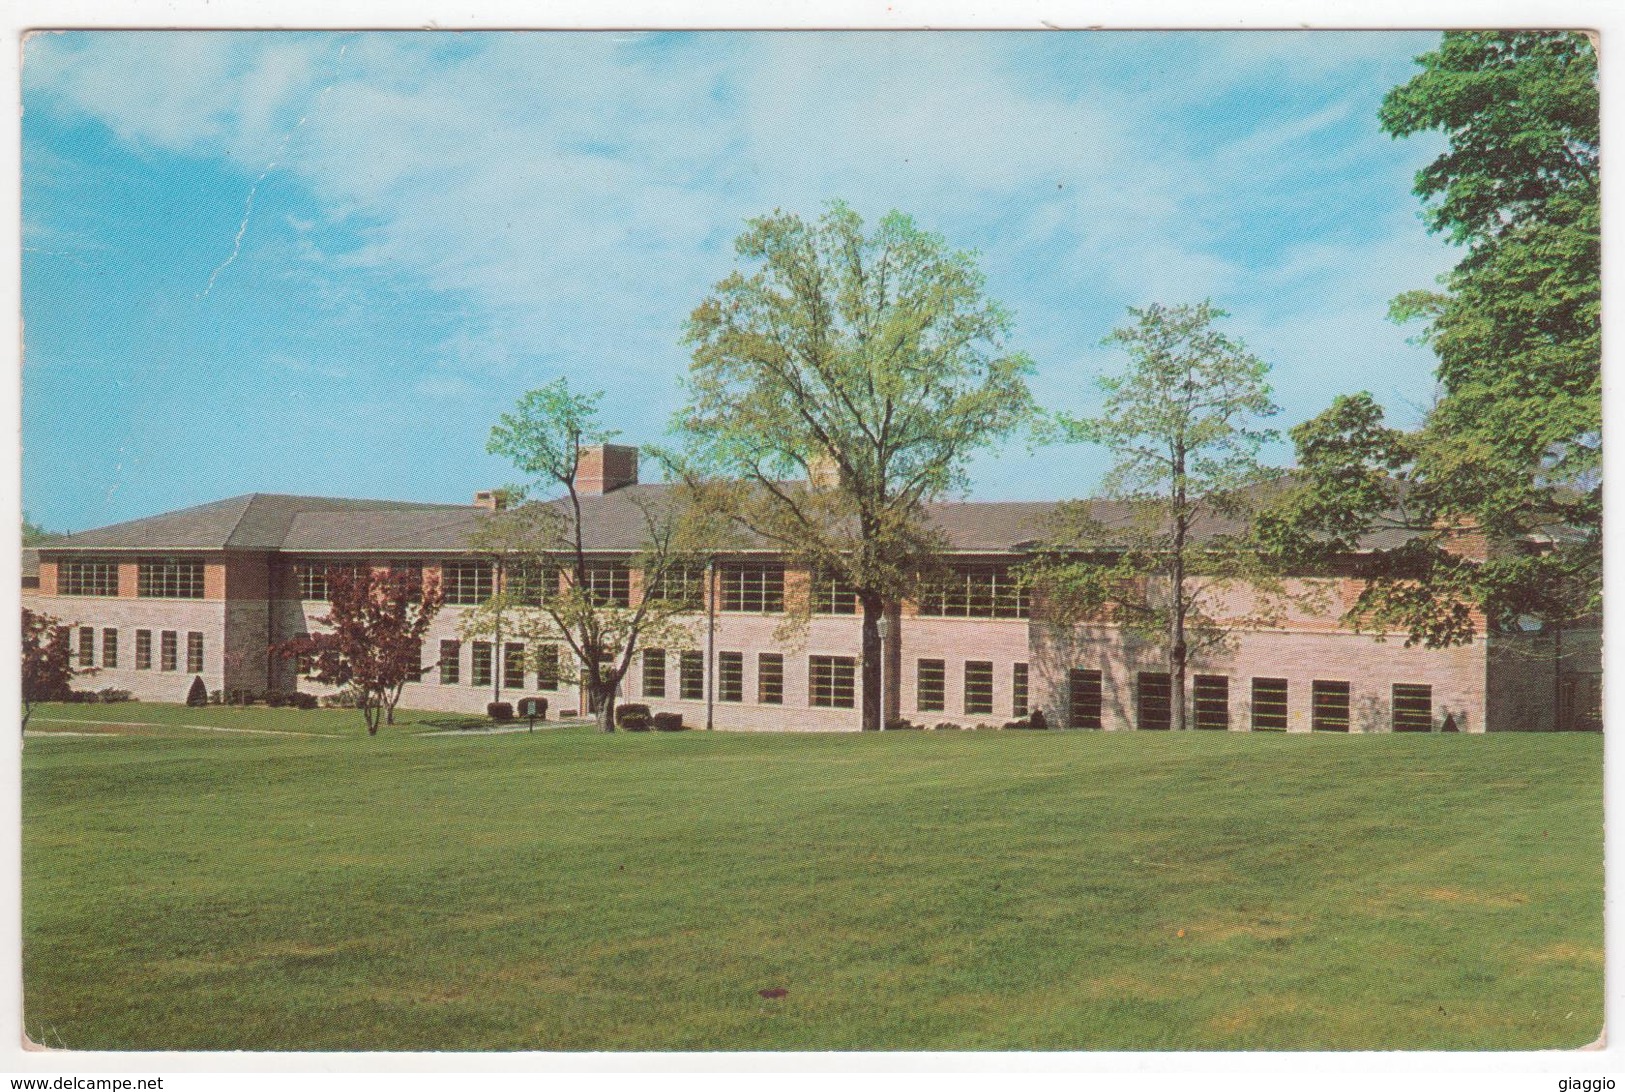 °°° 13797 - USA - NY - NEW YORK - BROWNSON HALL - With Stamps °°° - Education, Schools And Universities